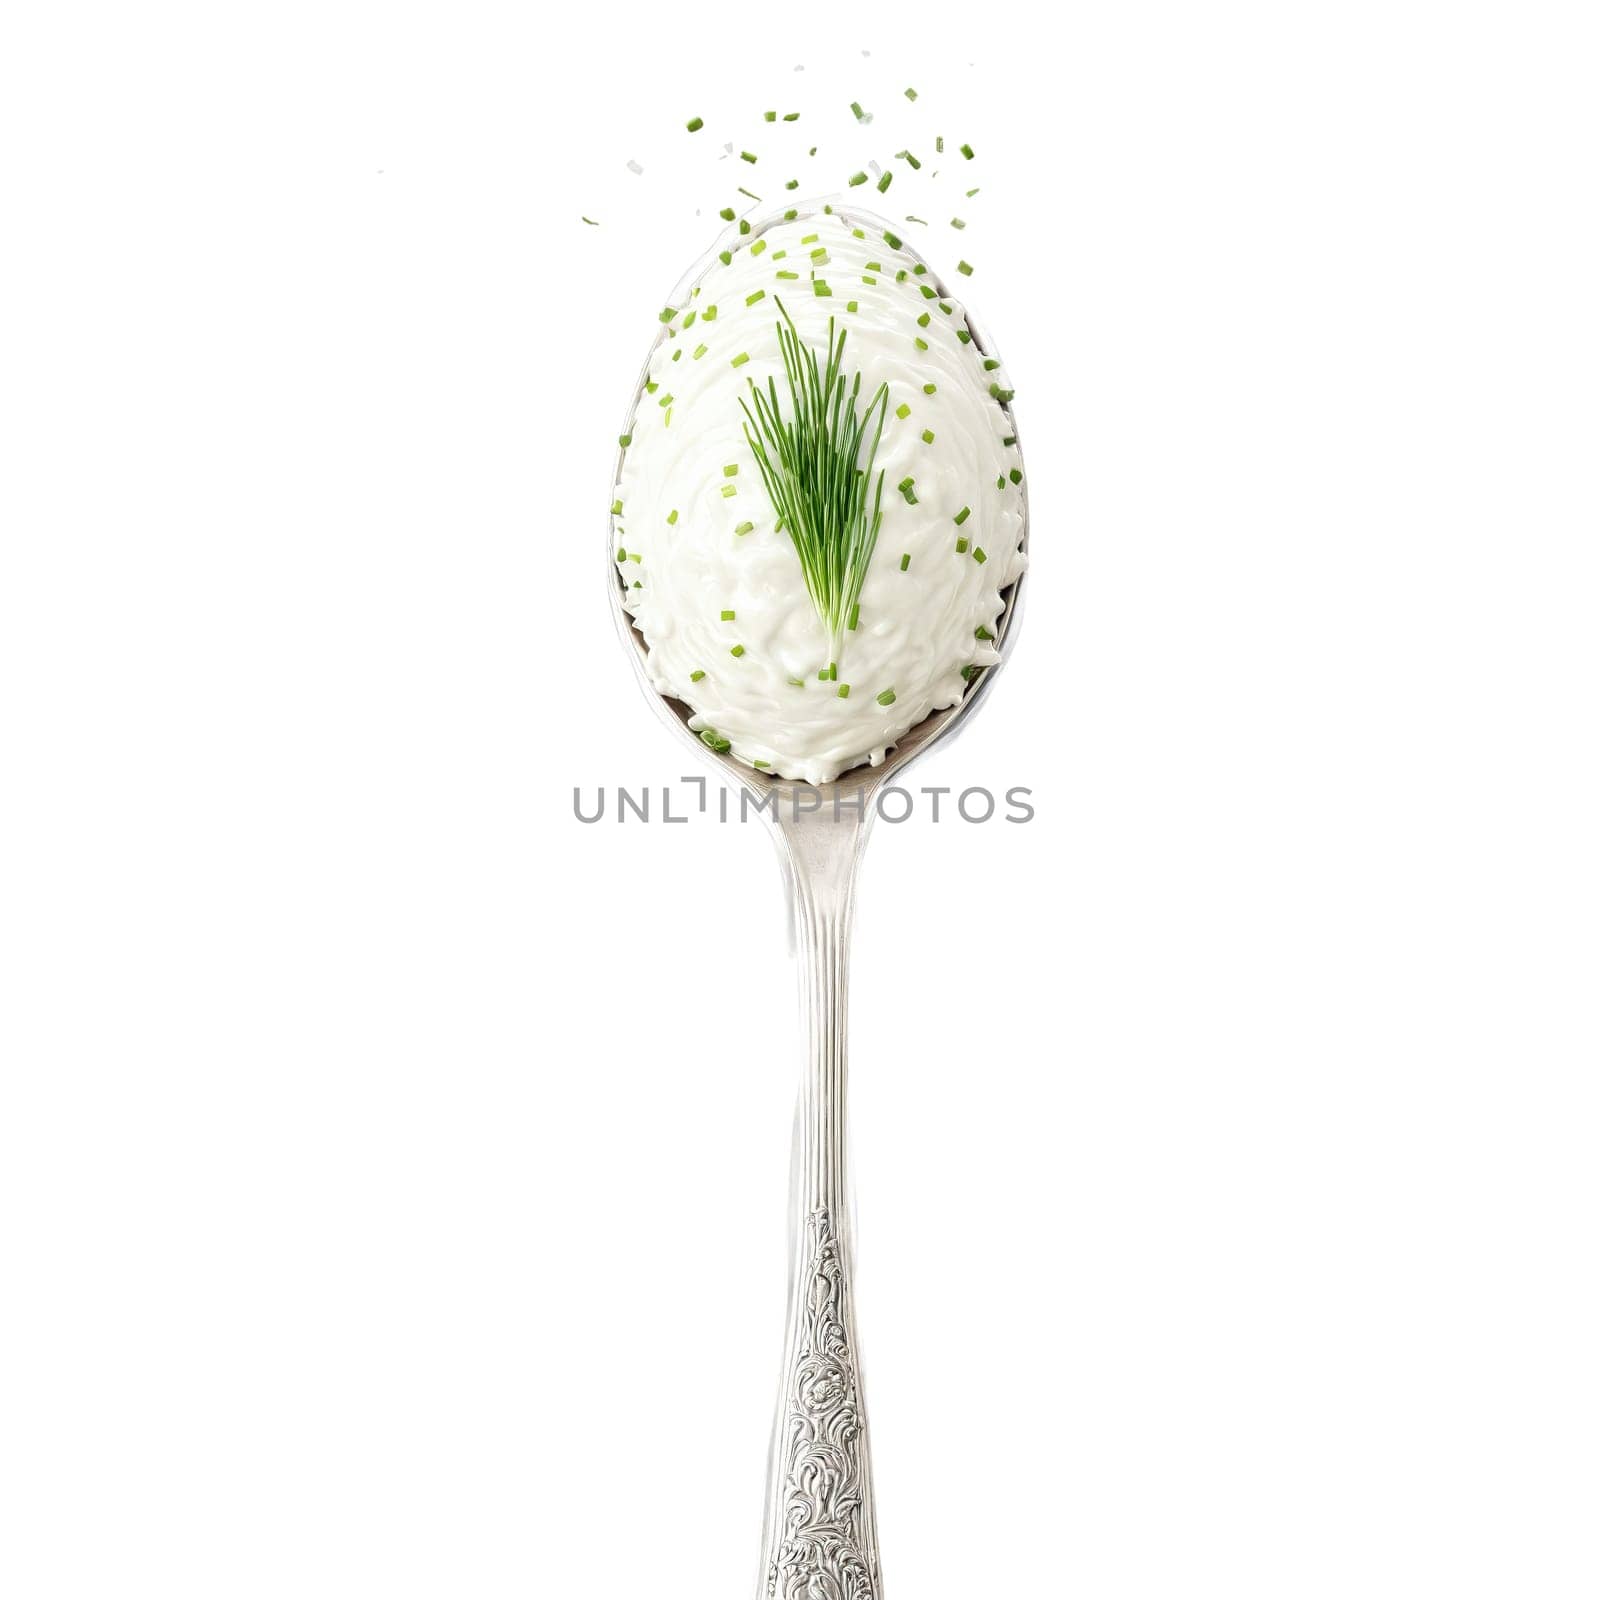 Sour cream dollop on spoon with chives sprinkled and steam rising Food and culinary concept. Food isolated on transparent background.